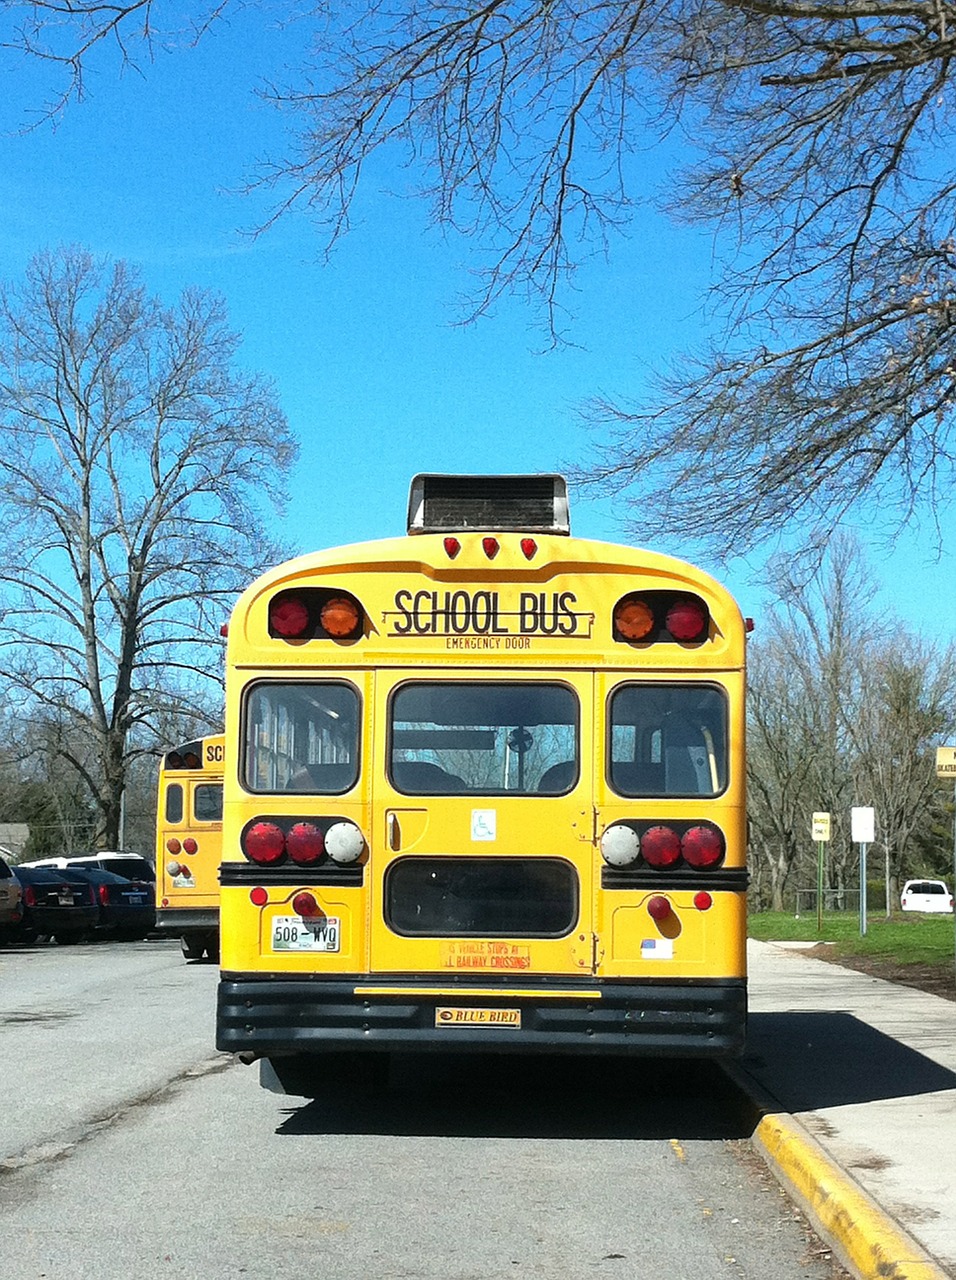 Why Electrify School Buses? It’s better for Children’s Health